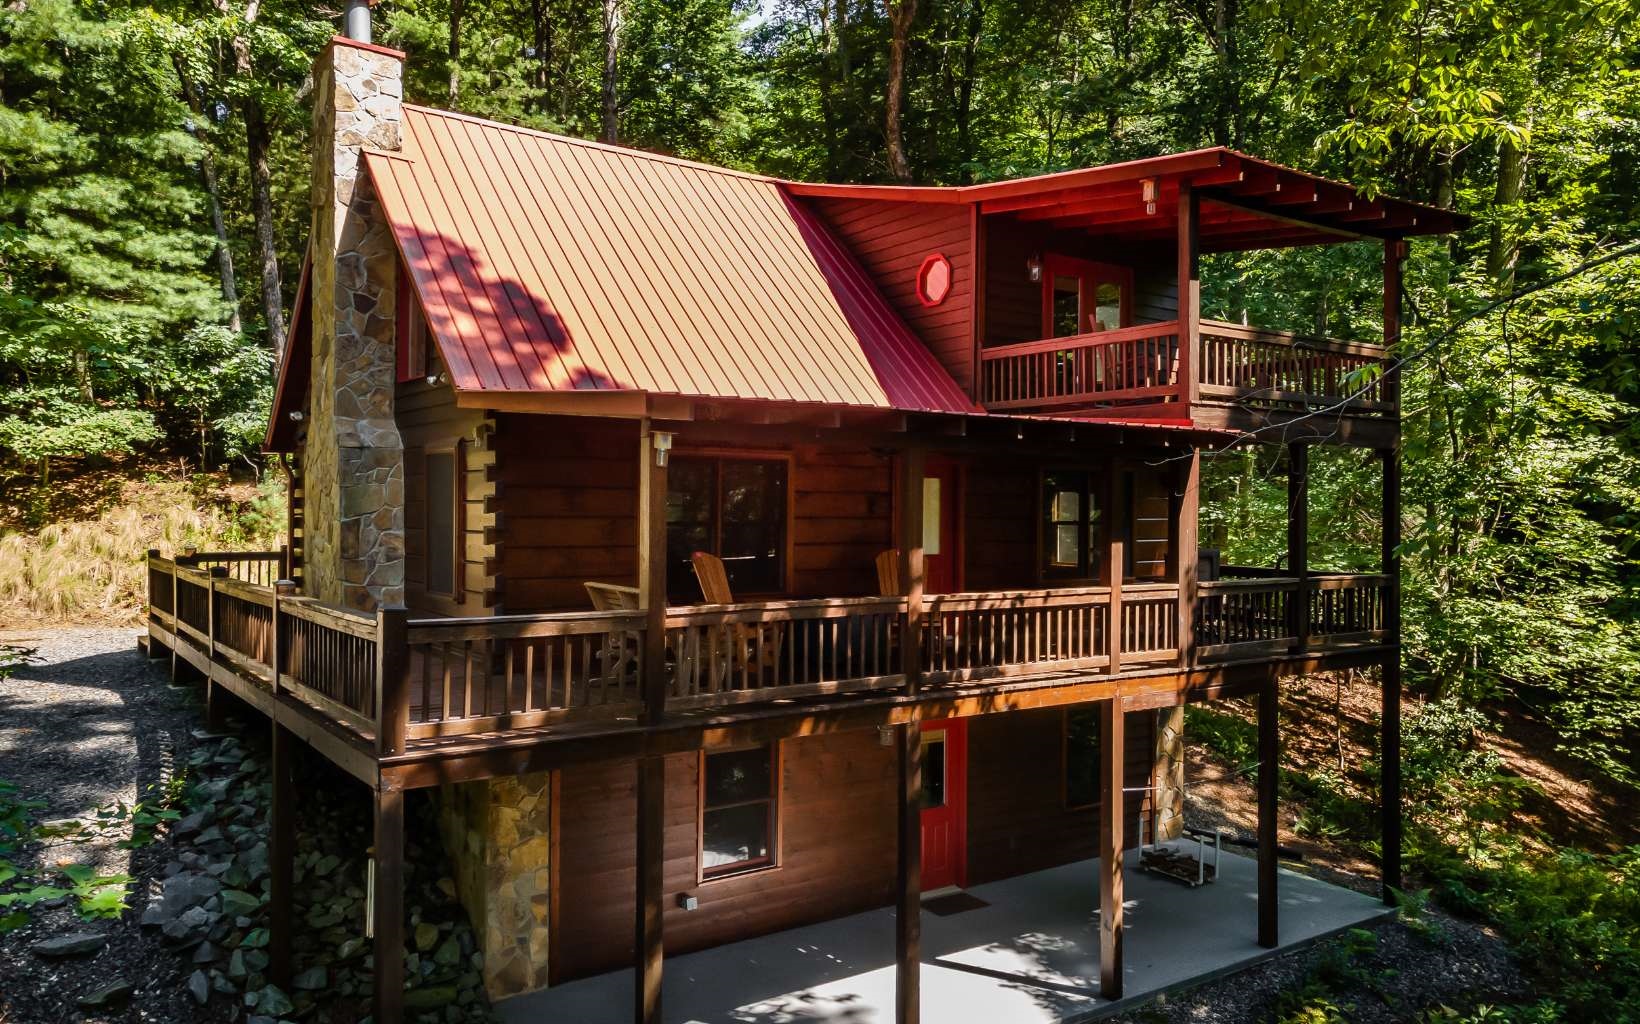 This Meticulously maintained “True Log Cabin” mountain get-a-way located in the Aska Adventure Area offering seasonal mountain views of an abundance of natural beauty that can only be seen in the Blue Ridge Mountains is now available! This picture-perfect 3BR/3BA/Loft plus finished basement Mountain Get-a-way offers split-rail fencing along the driveway & parking area, a flagstone rocked wood burning fireplace in the spacious main floor great room & a ventless gas log fireplace in the terrace level family room; lovely pine tongue & grove interior walls & cathedral ceilings and immaculate pine flooring; private porch off the upper-level master BR, main floor Living room & terrace level family room (perfect for adding a hot tub). Now Showing, your new mountain home!!